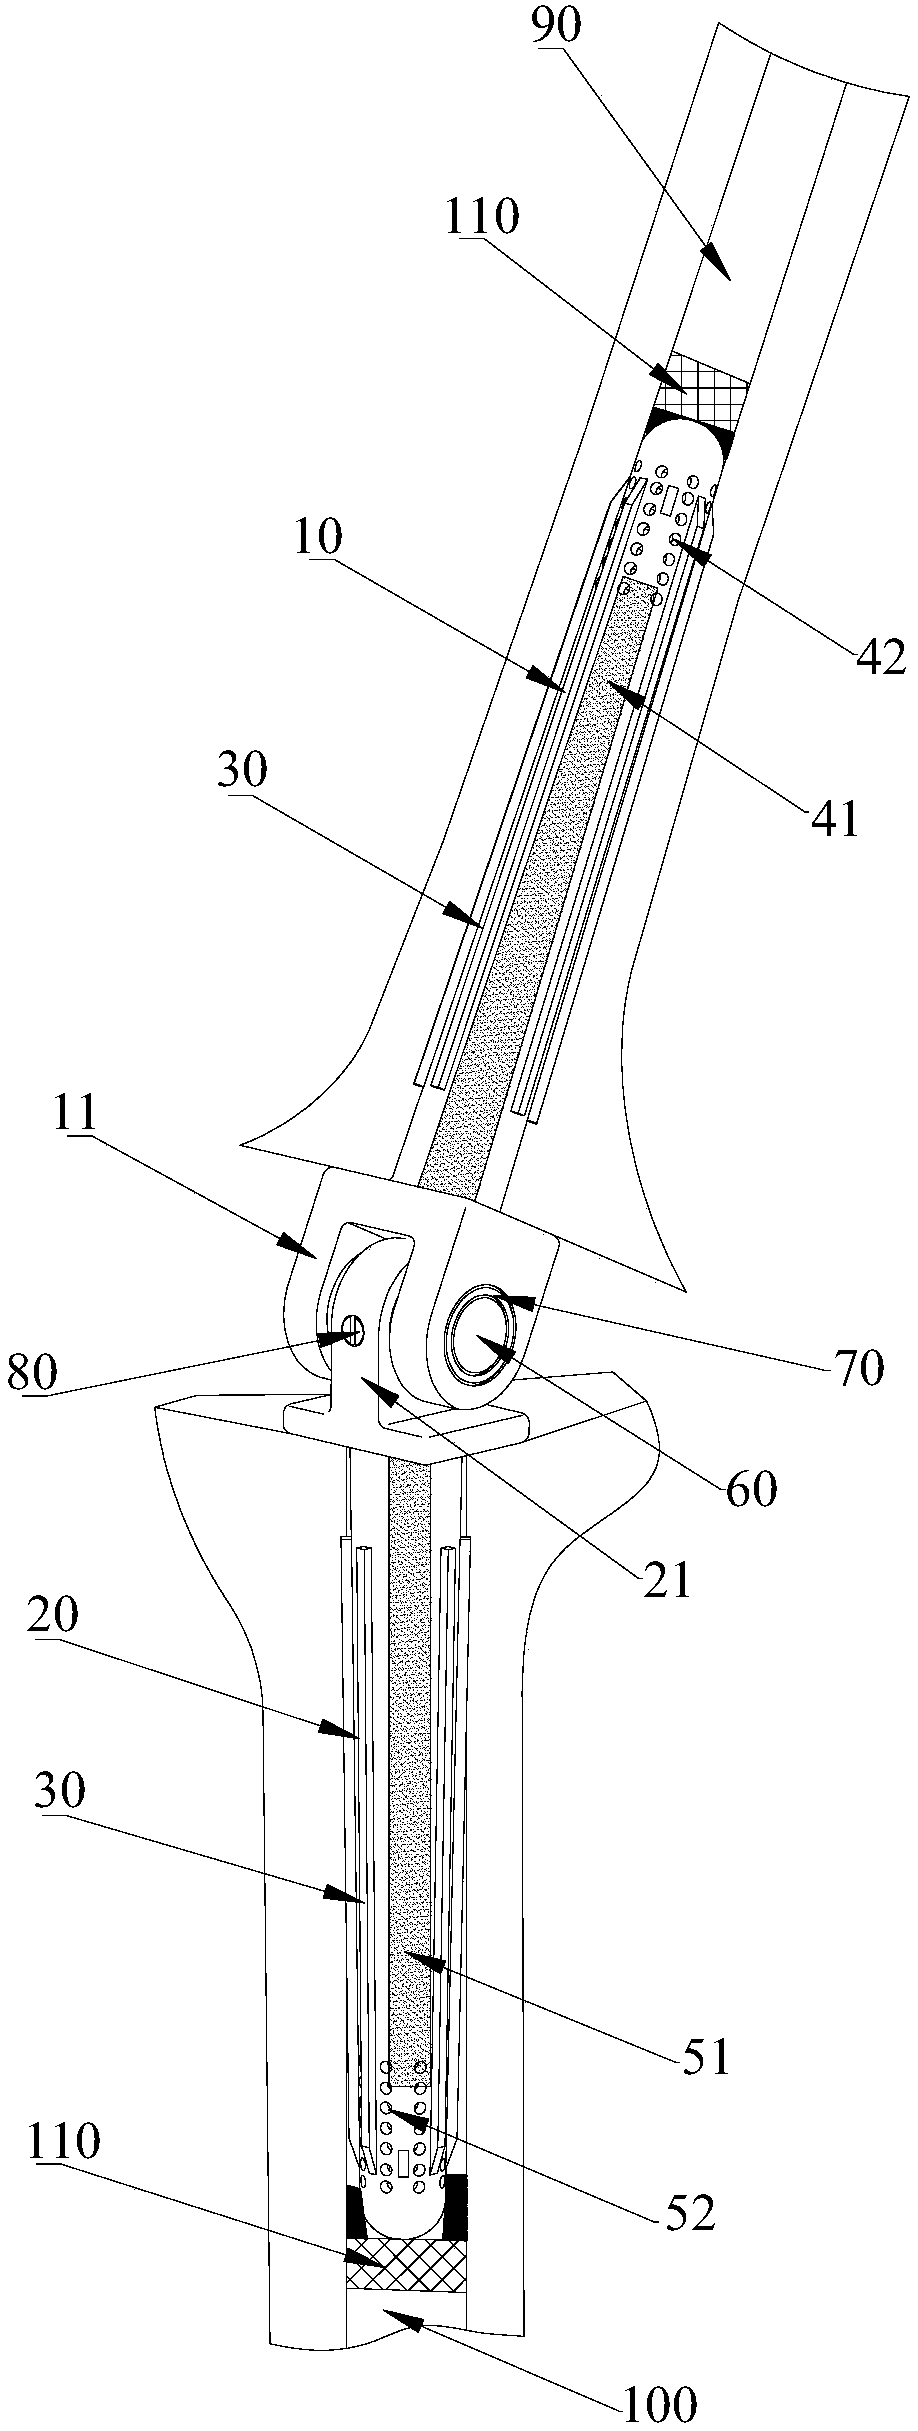 Elbow joint prosthesis